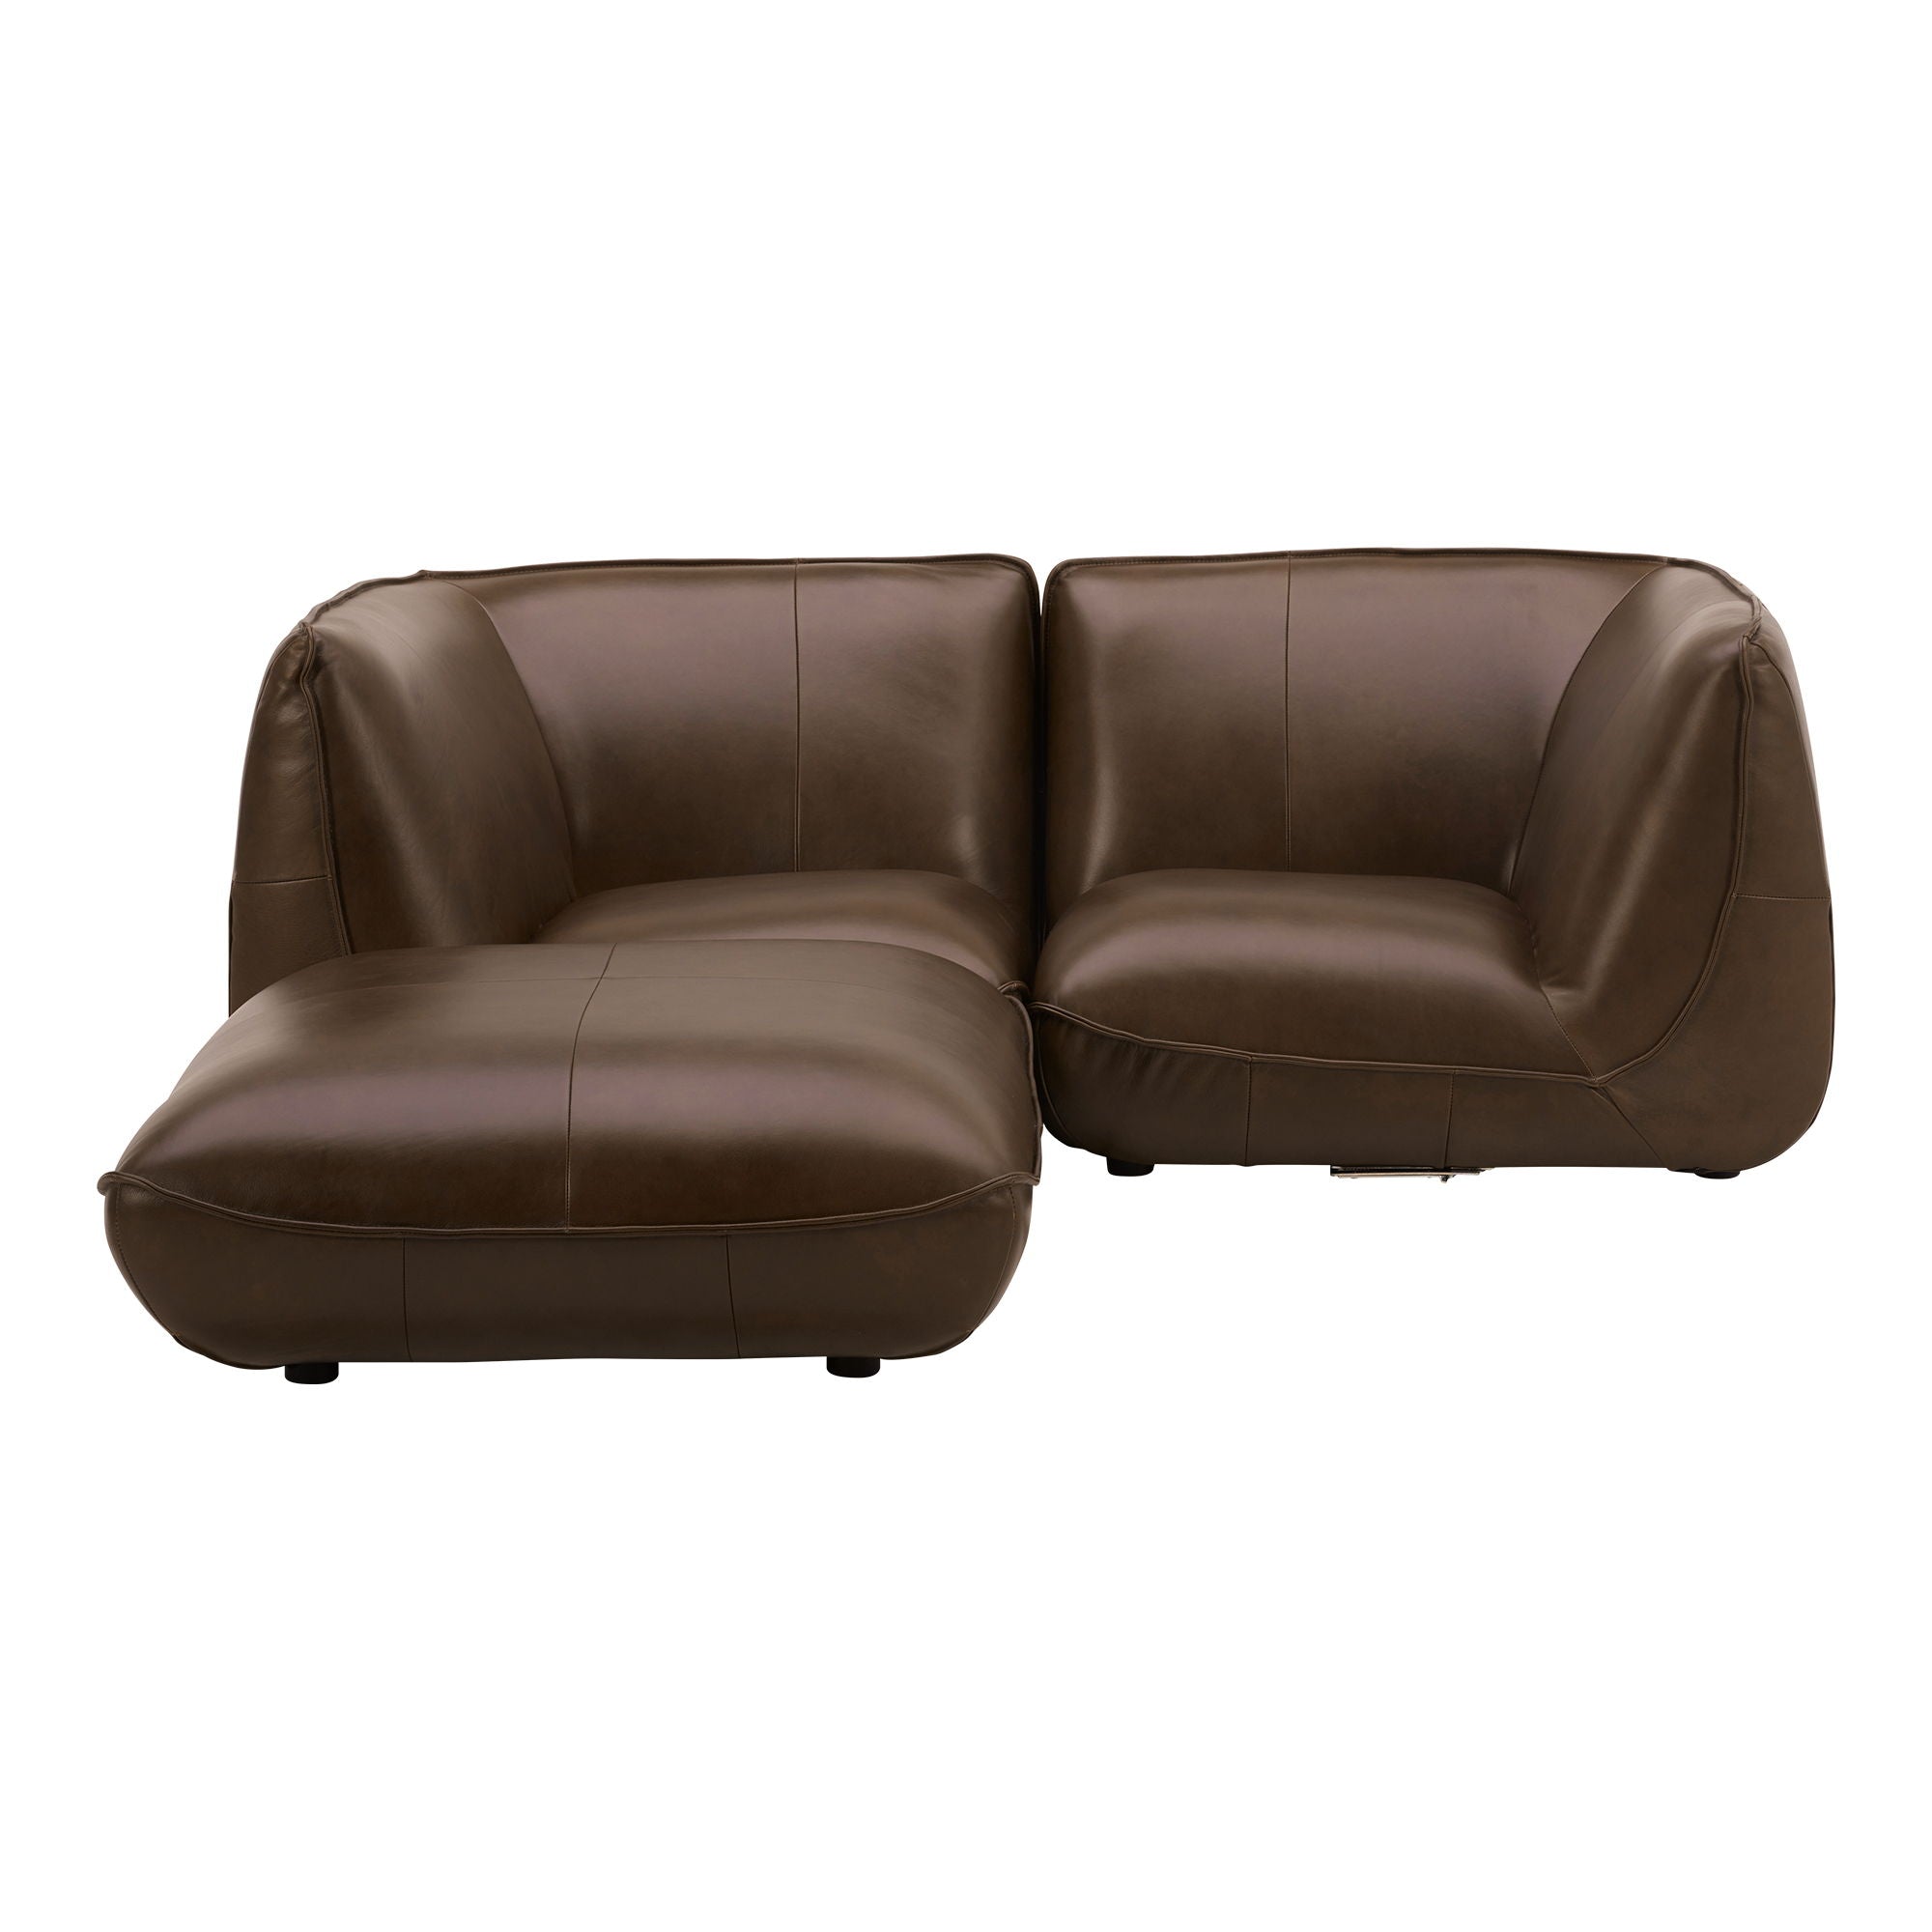 Dark Brown Leather Sectional - Modular Zeppelin Nook-Stationary Sectionals-American Furniture Outlet